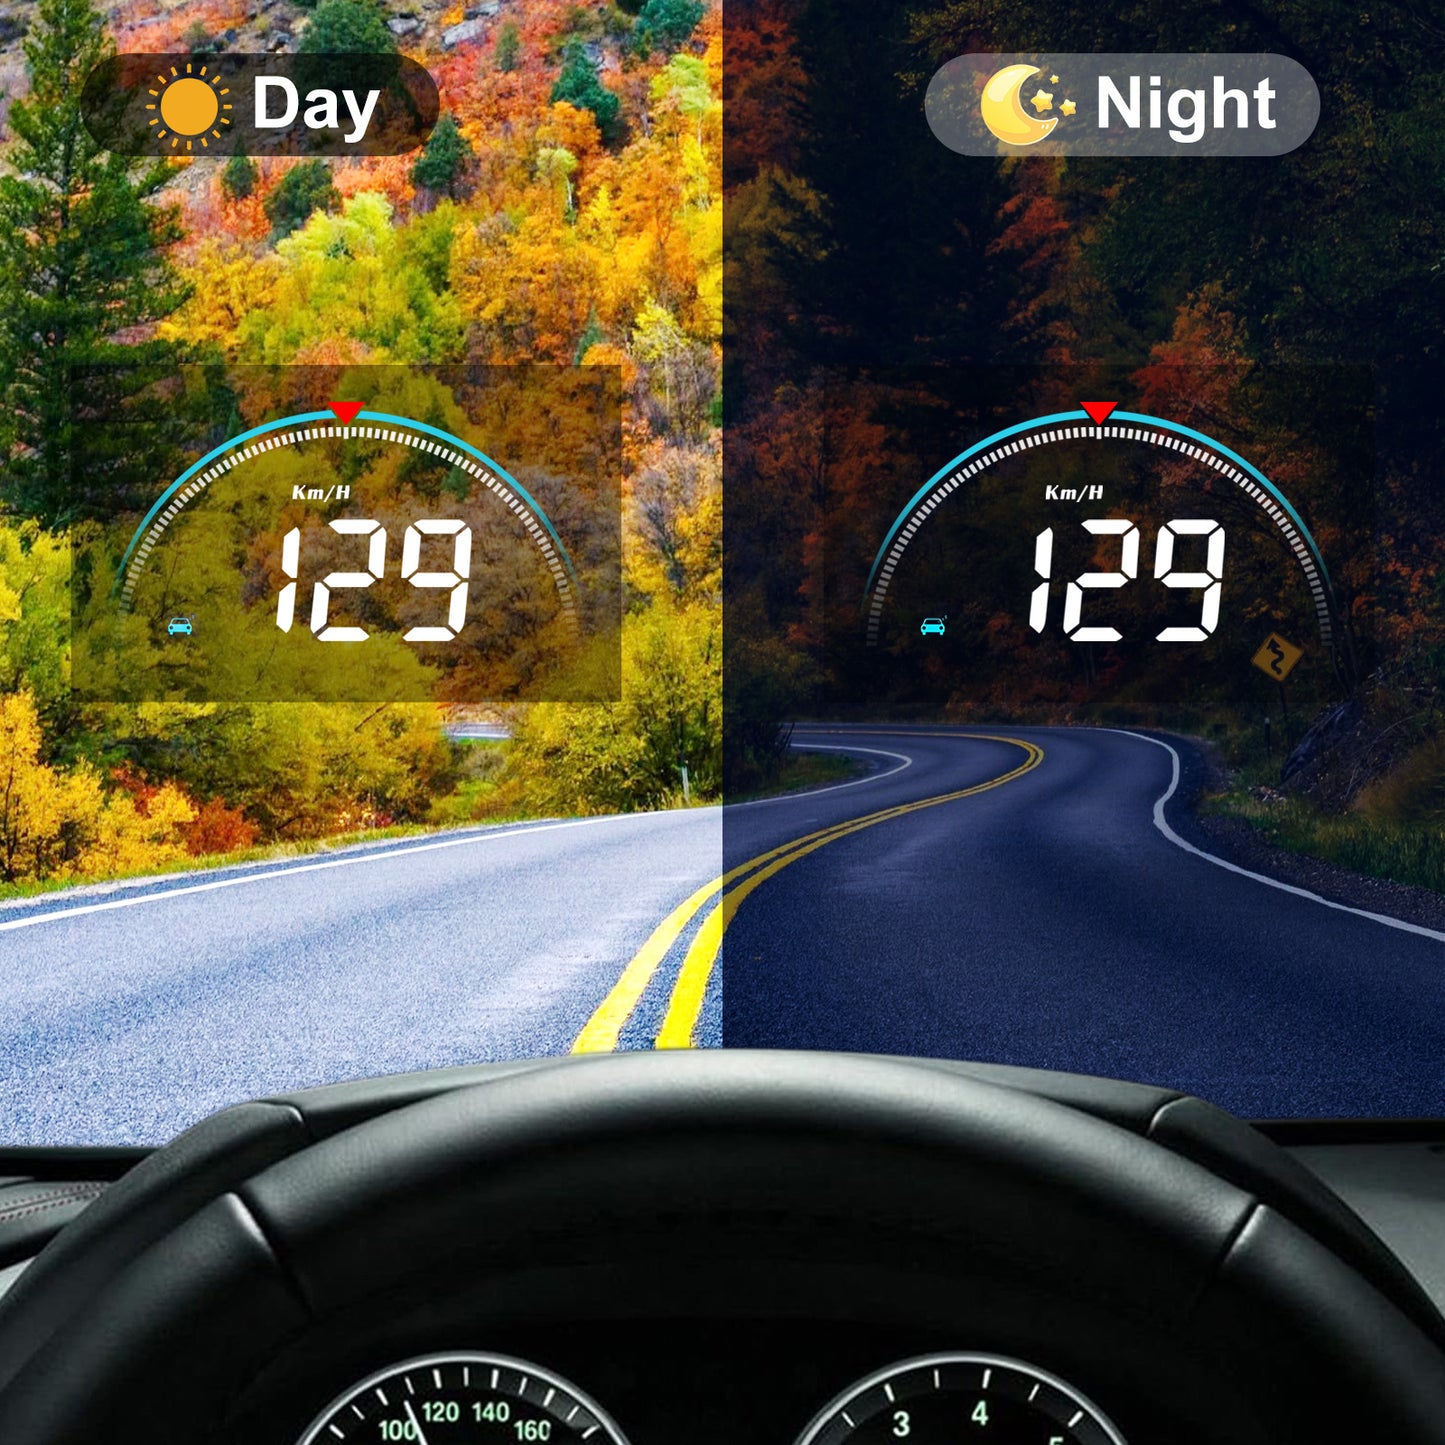 Car Head-Up Display Gauge - 3.5" LED Screen, OBD2 Powered, Multi-Function Monitoring,alerts for high speed, low voltage, or high water temperature